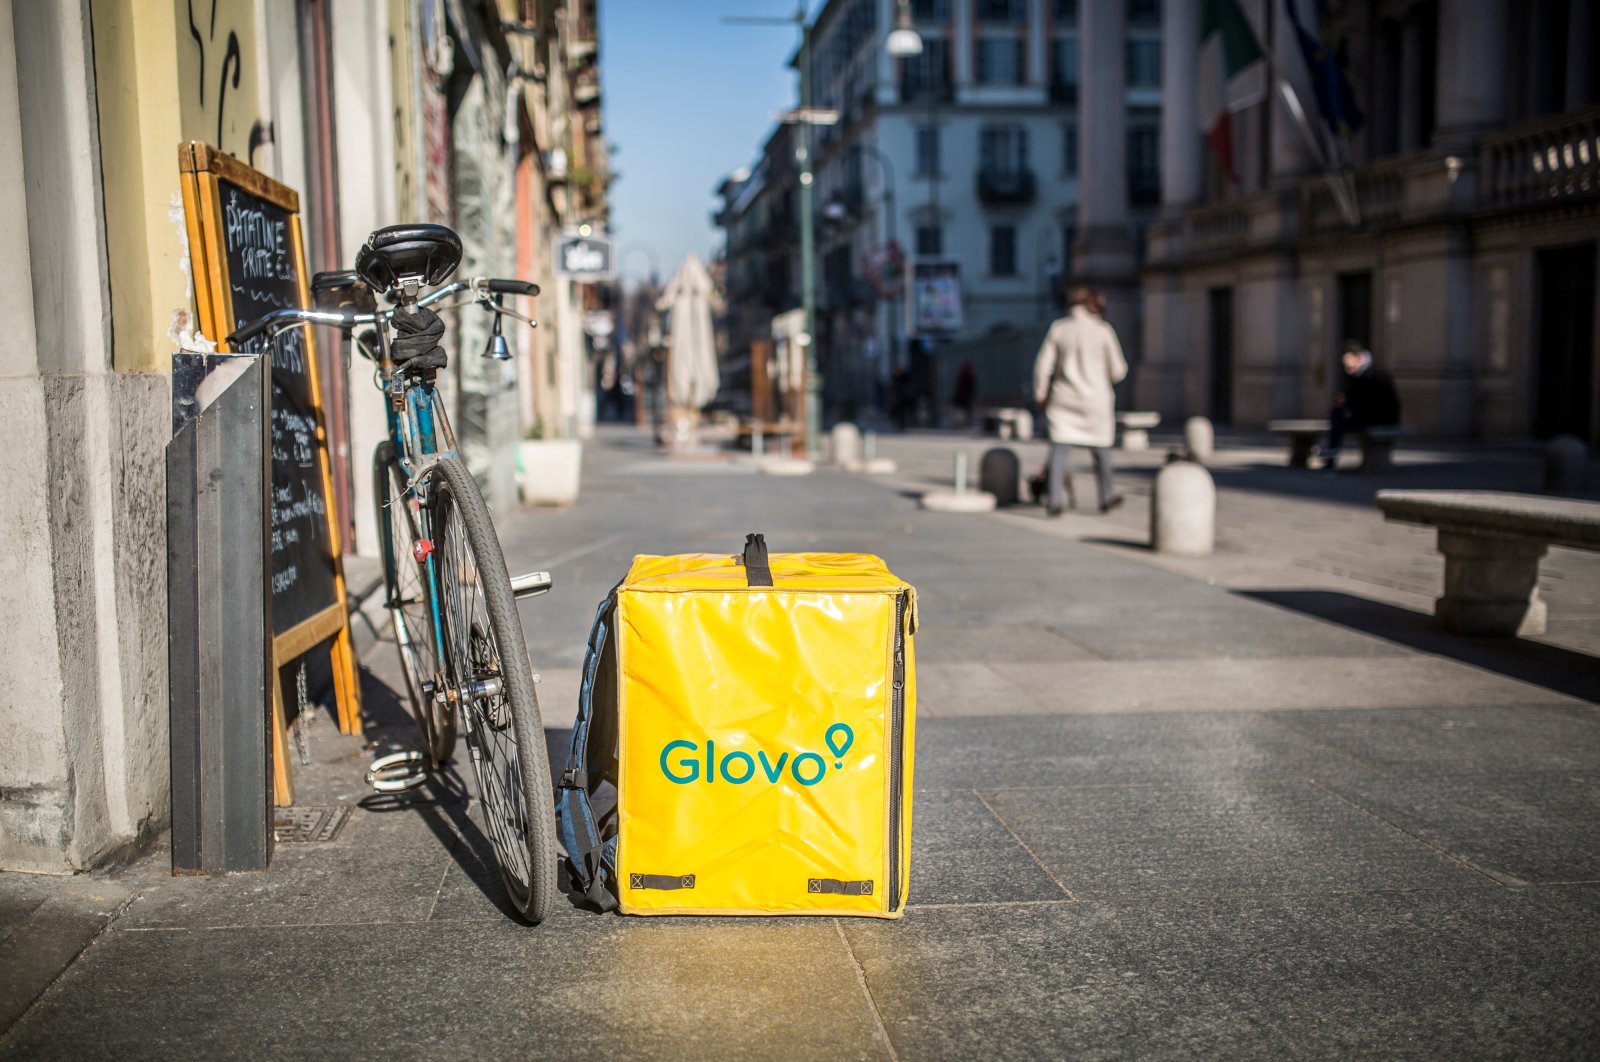 A Glovo delivery backpack is kept next to a delivery bike on the street of Turin, Italy, Feb. 5, 2019. (Shutterstock Photo)